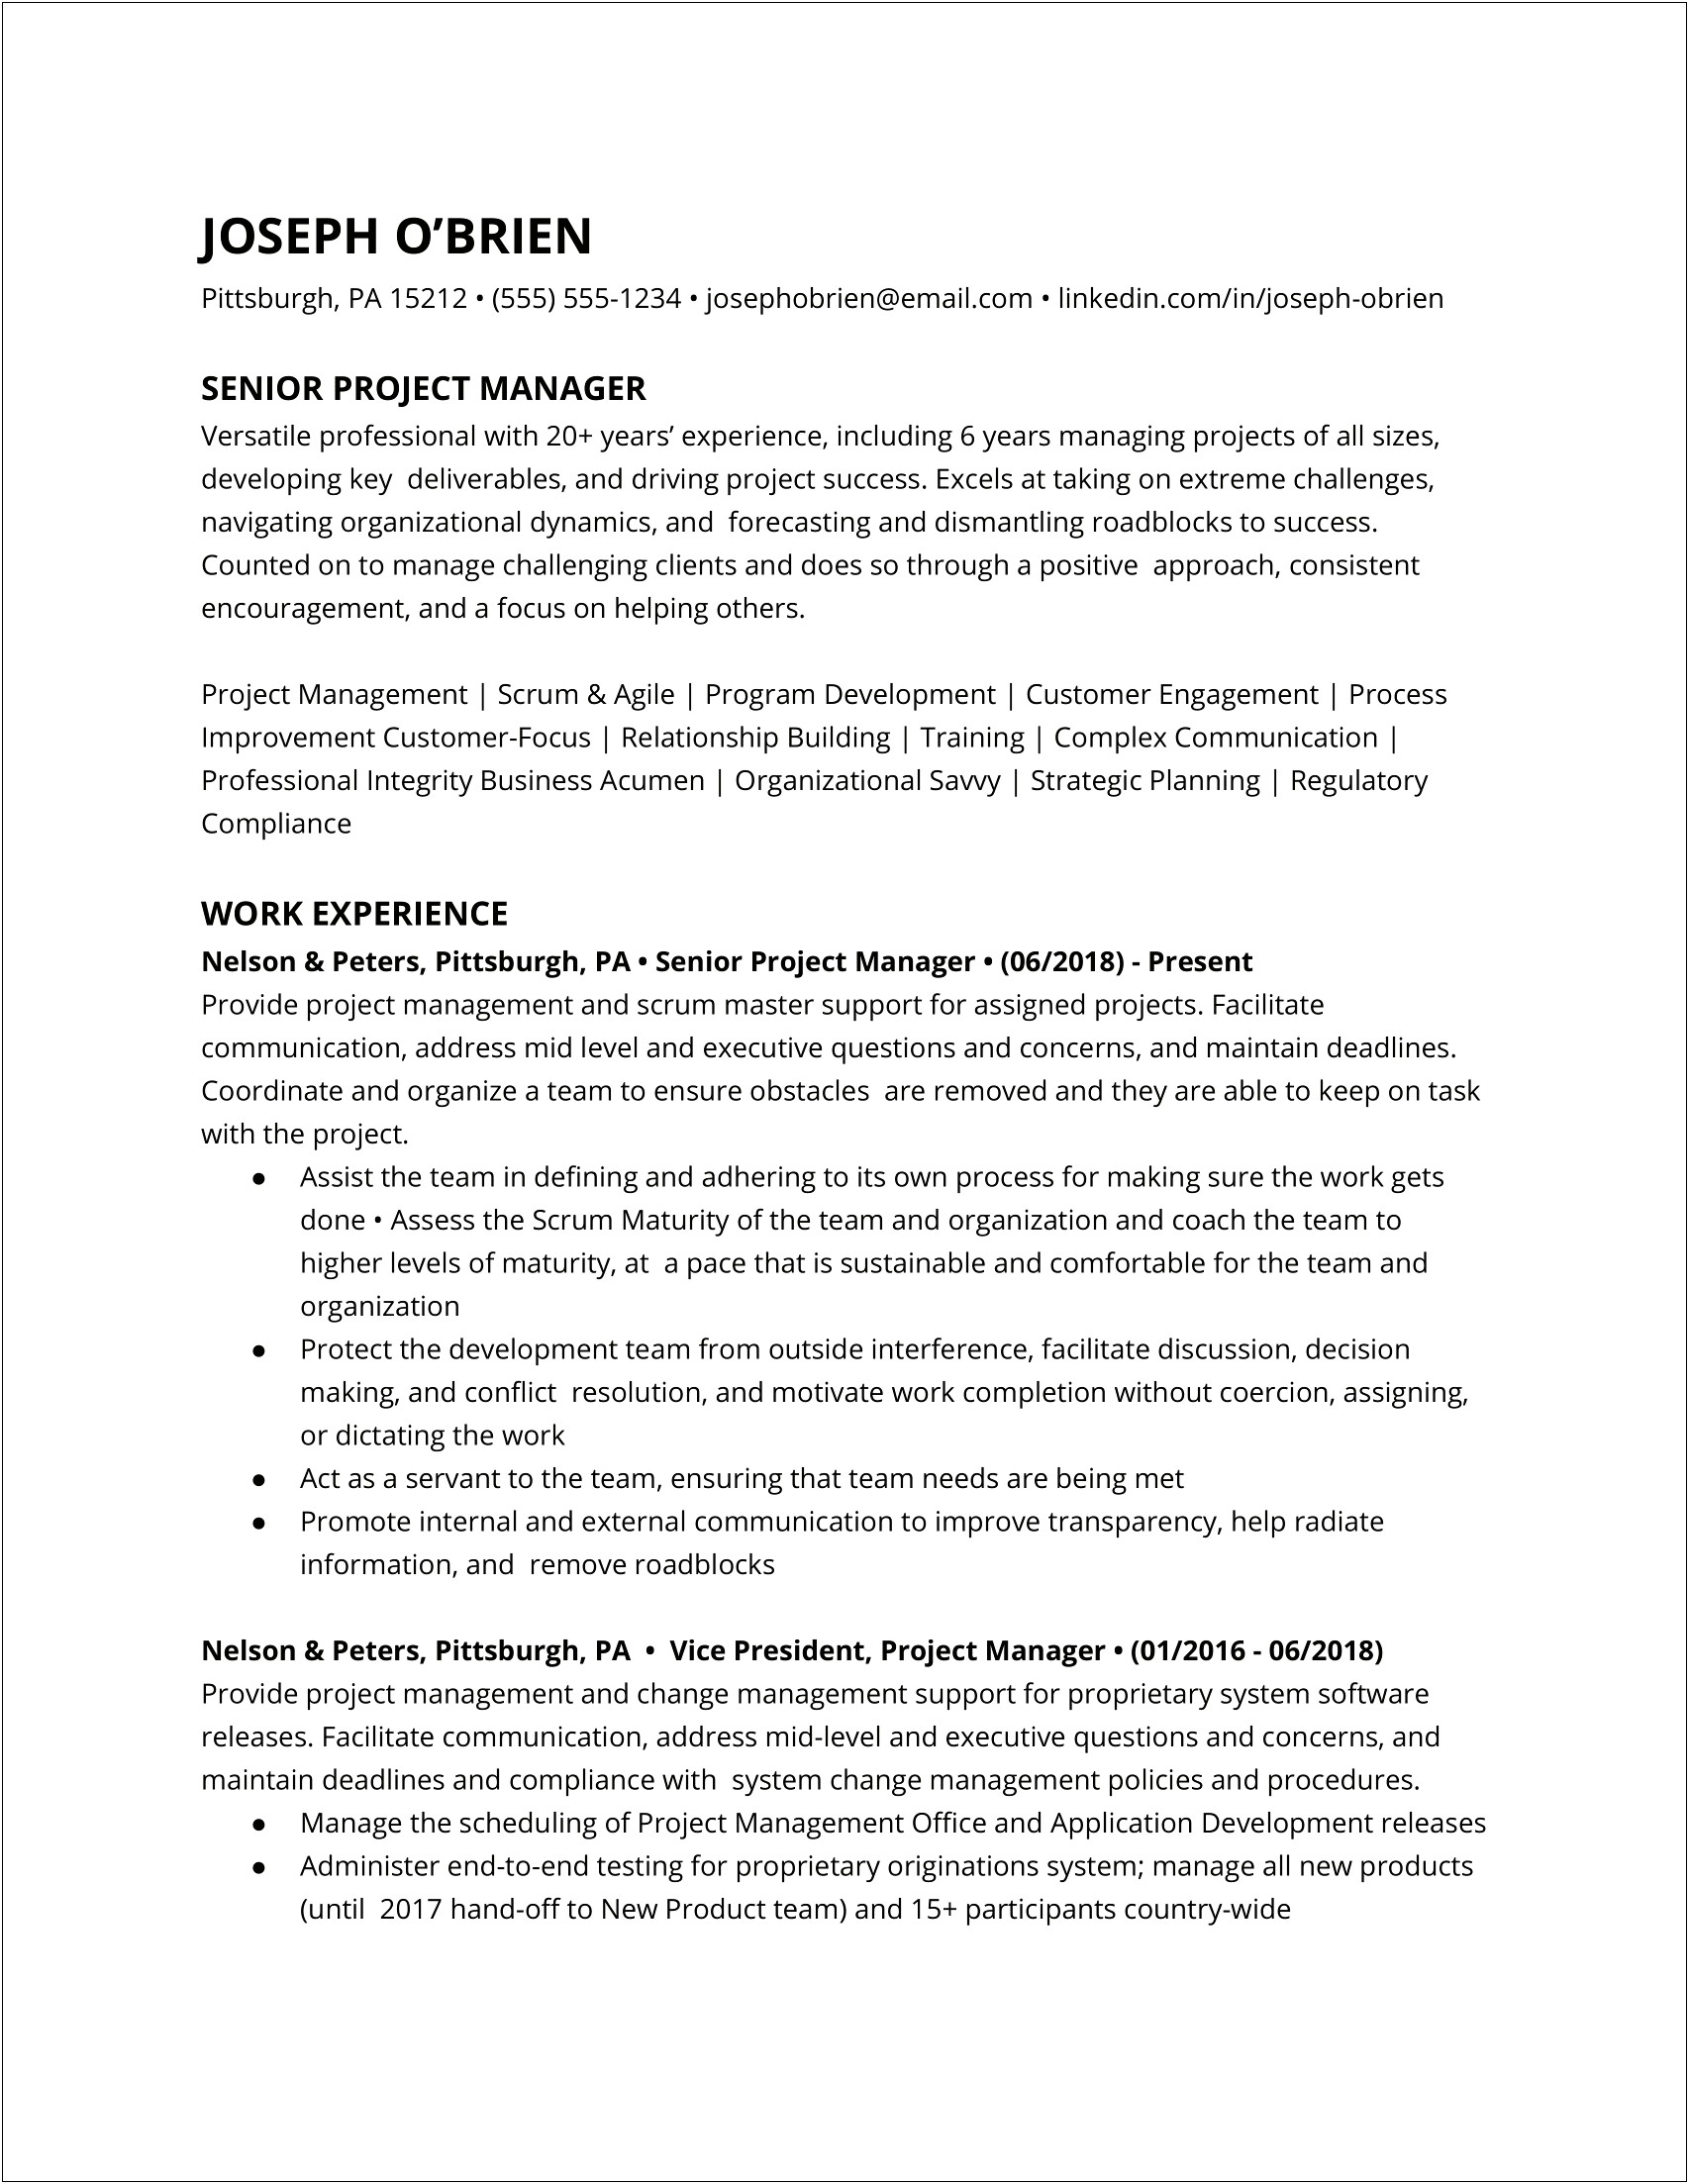 Listing Management As A Skill On A Resume